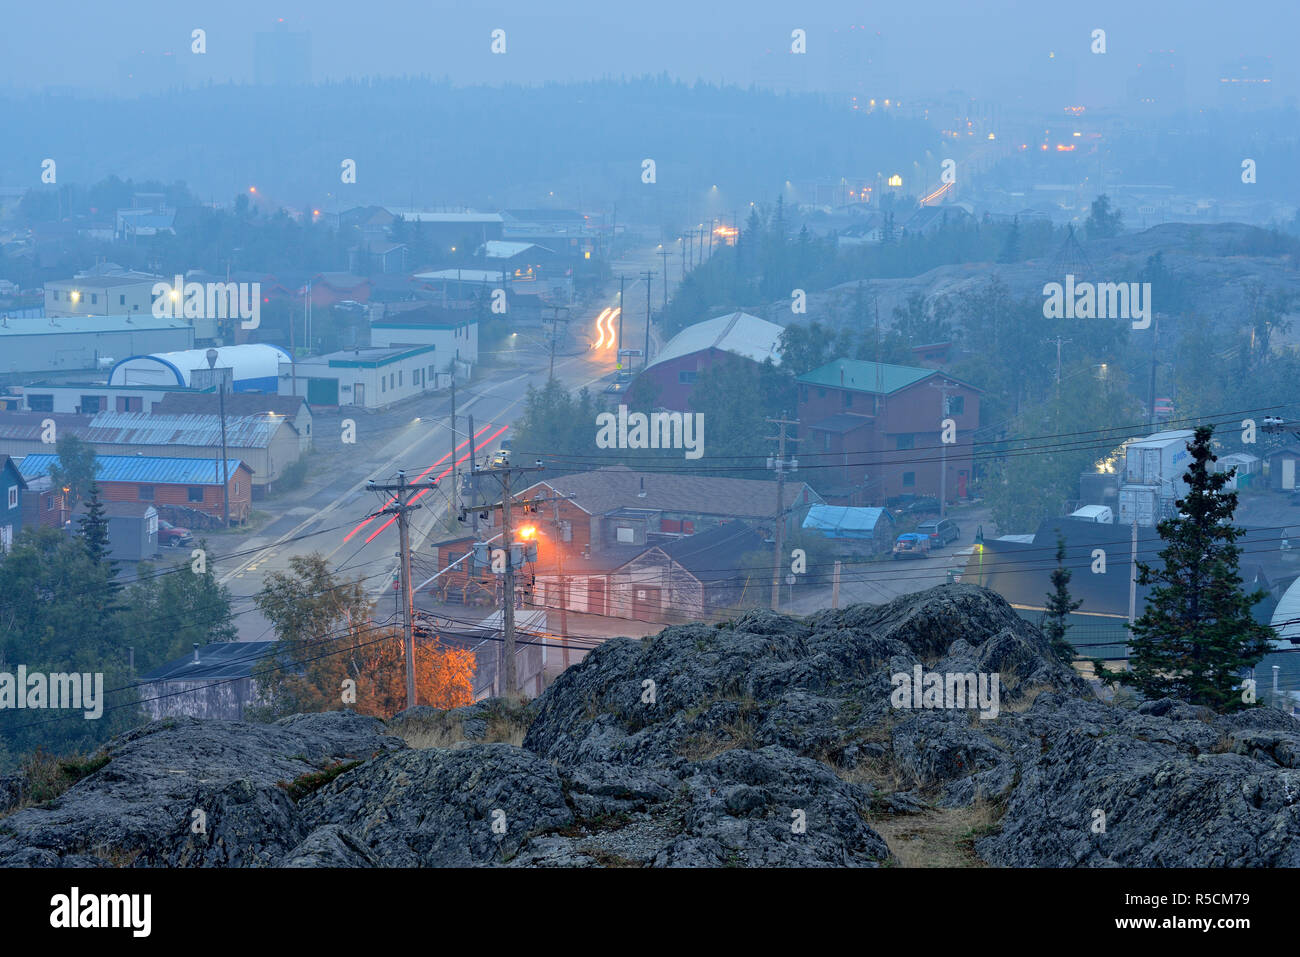 Old Town of Yellowknife from Pilot's Monument, Yellowknife, Northwest Territories, Canada, Stock Photo